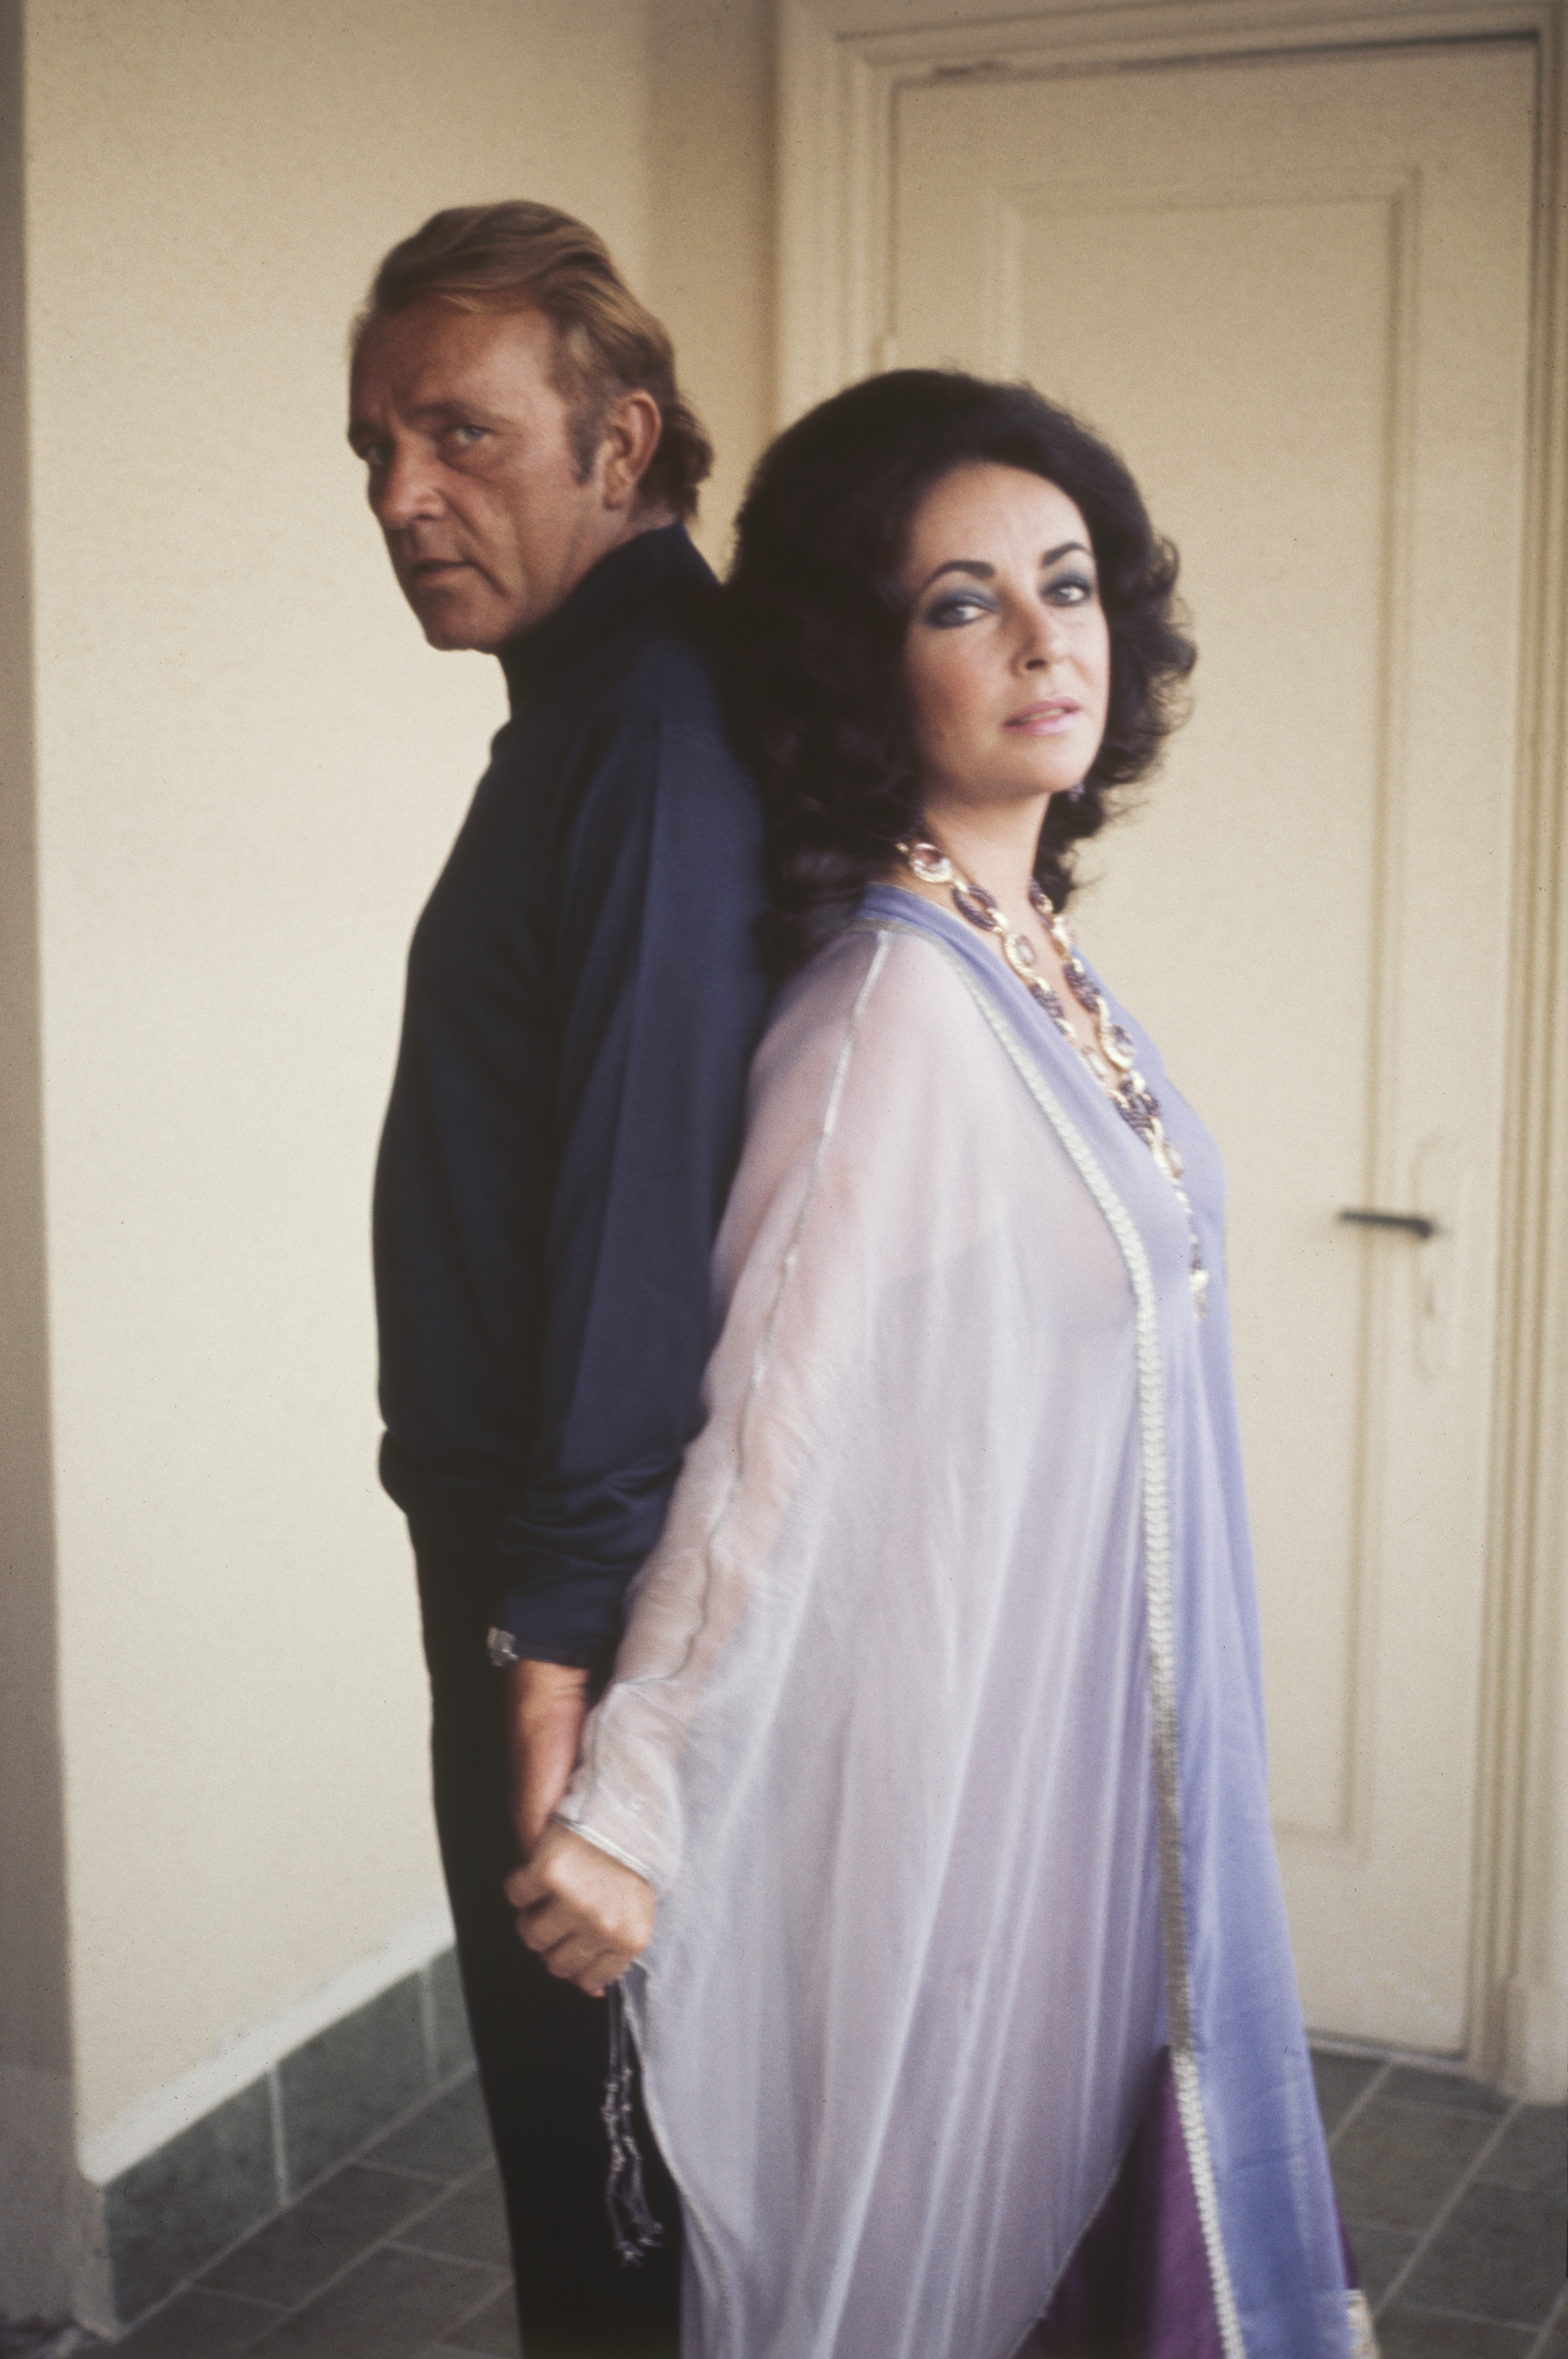 Richard Burton and Elizabeth Taylor in 1975. | Source: Getty Images